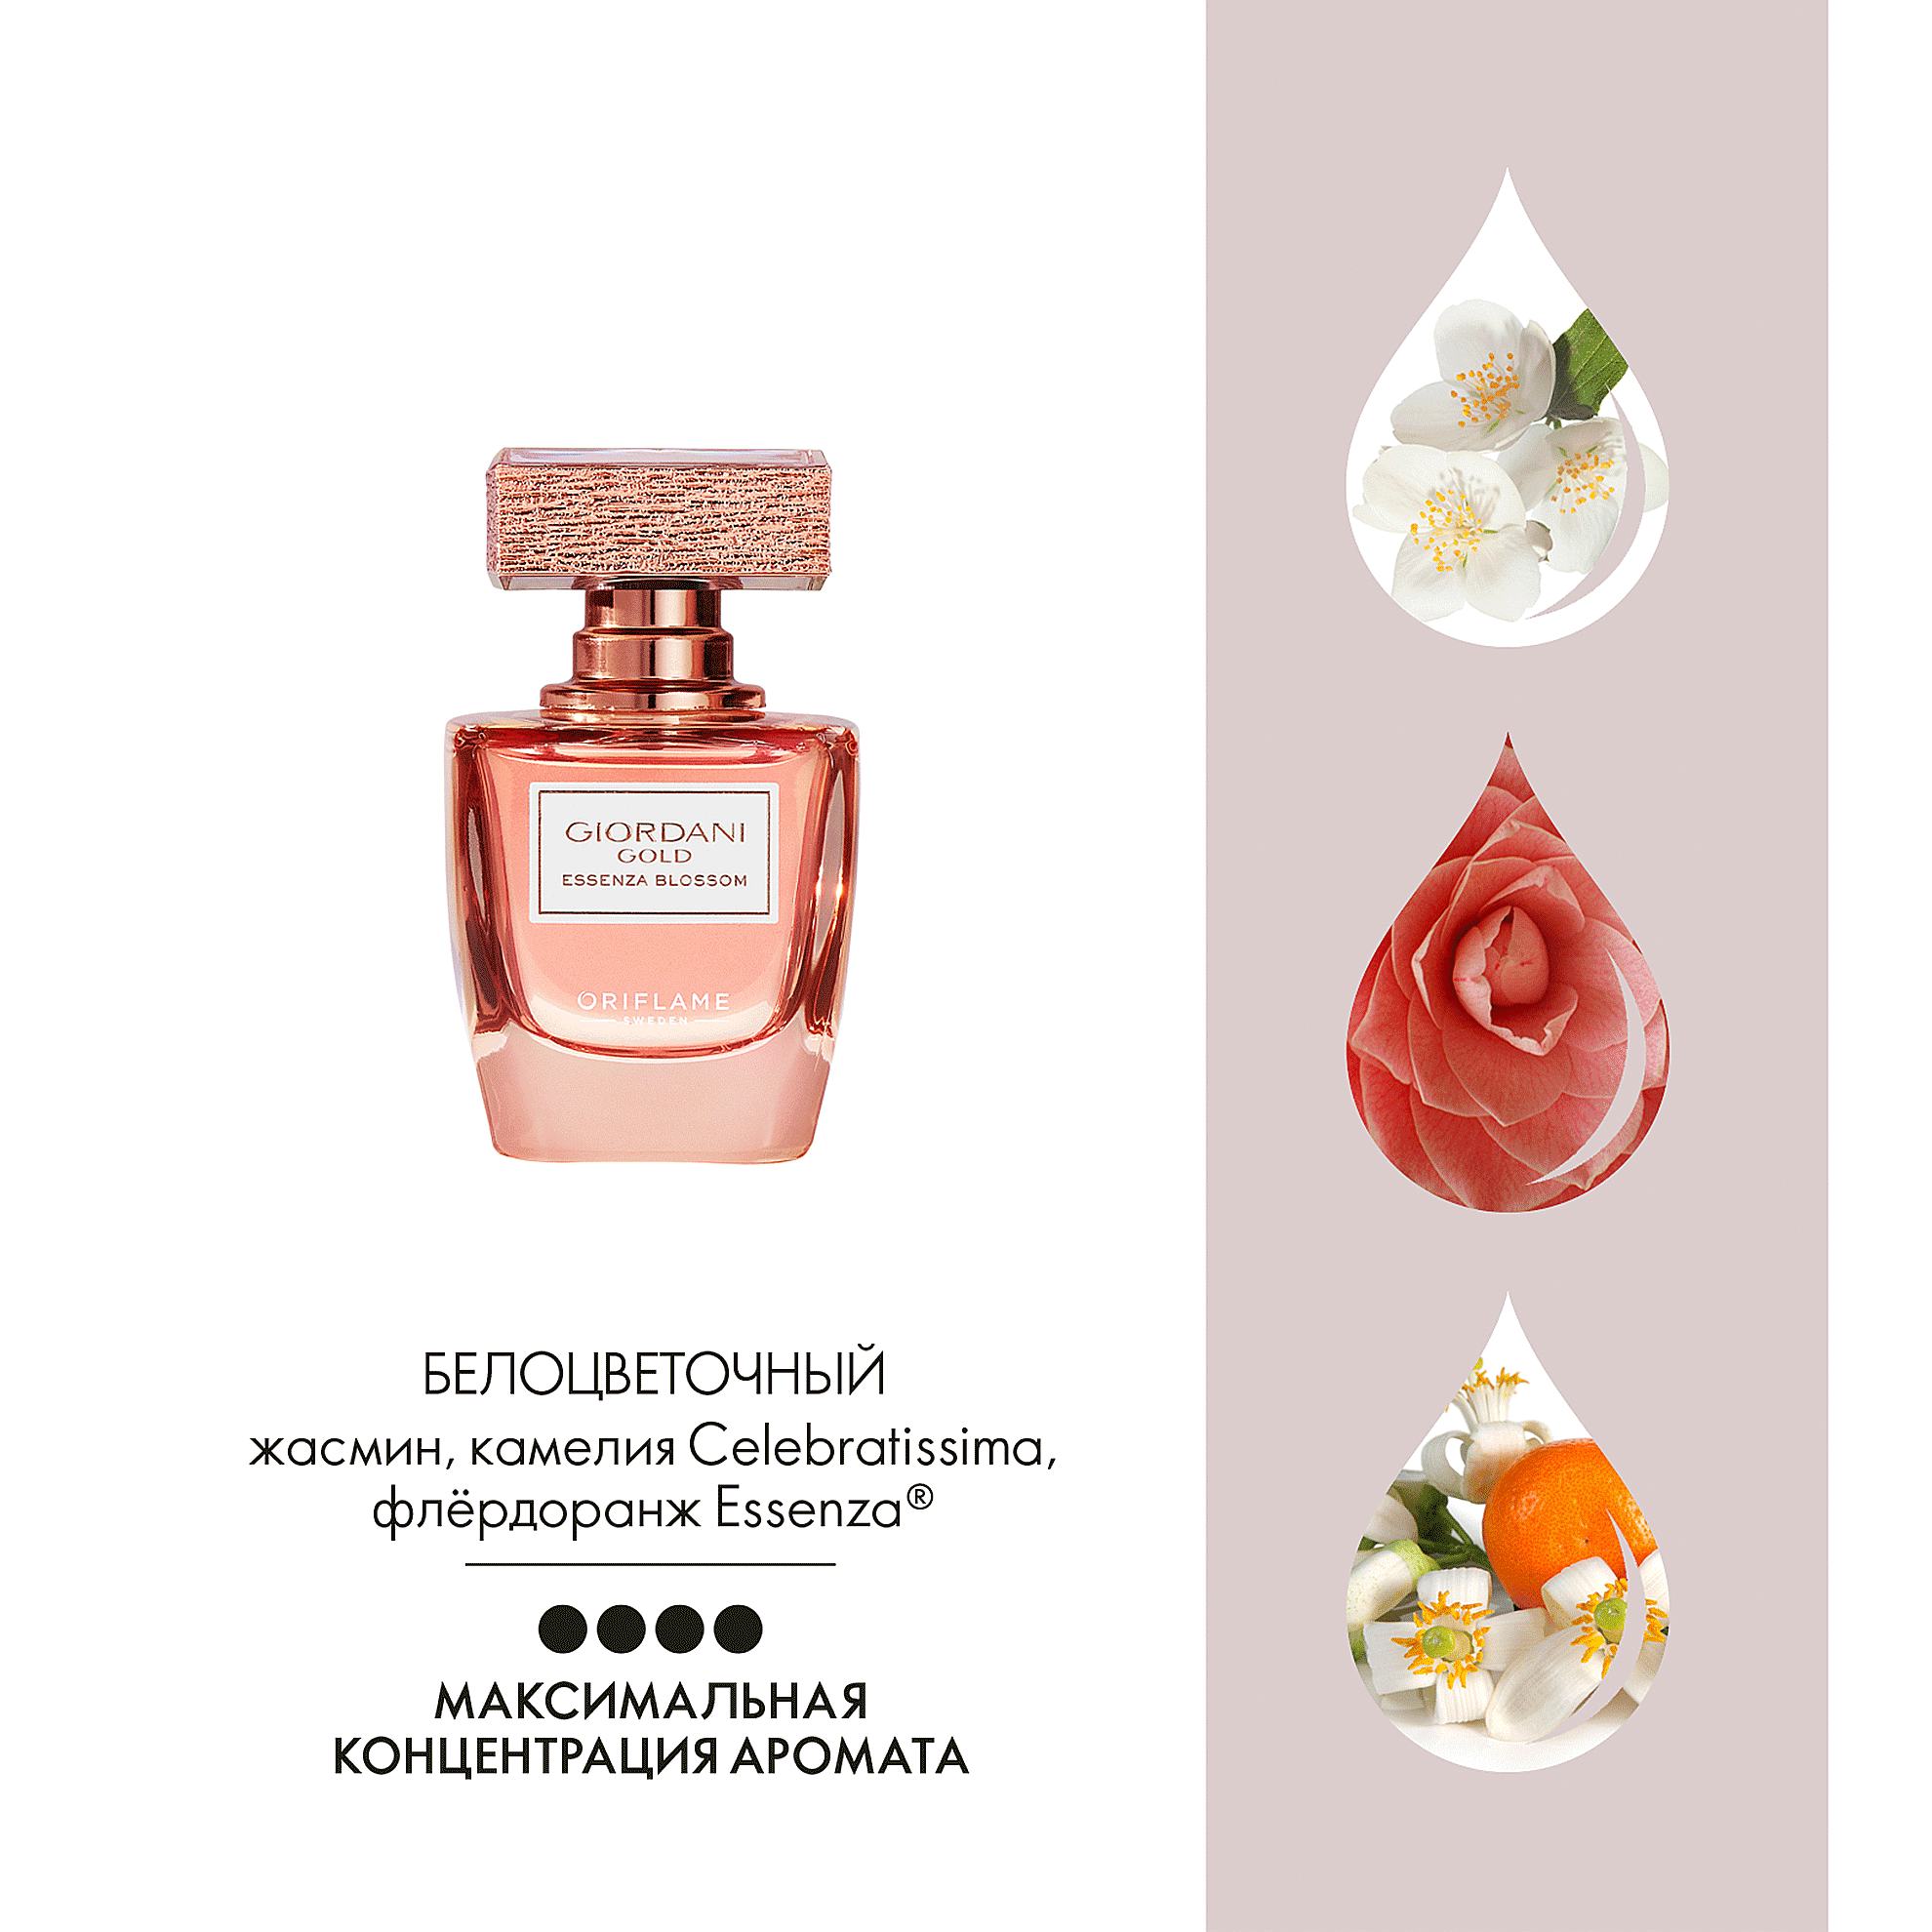 https://media-cdn.oriflame.com/productImage?externalMediaId=product-management-media%2fProducts%2f38534%2fRU%2f38534_6.png&id=14714386&version=1